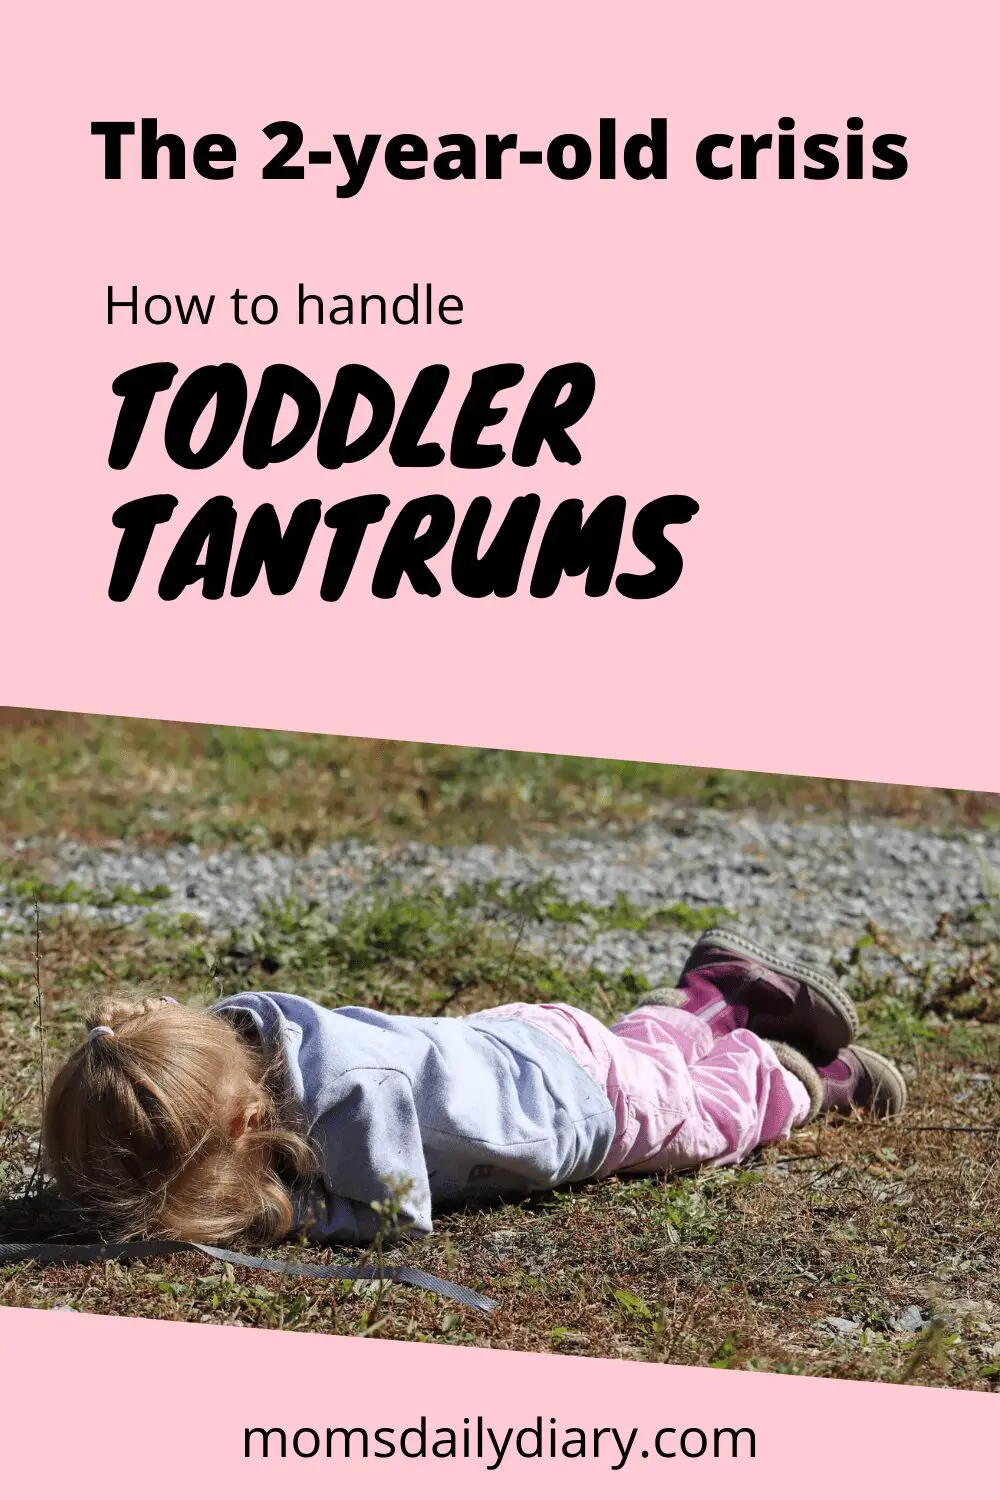 Toddler tantrums are a nightmare for every parent. But they don't have to be. Here's a guide on how to handle toddler tantrums like a pro.